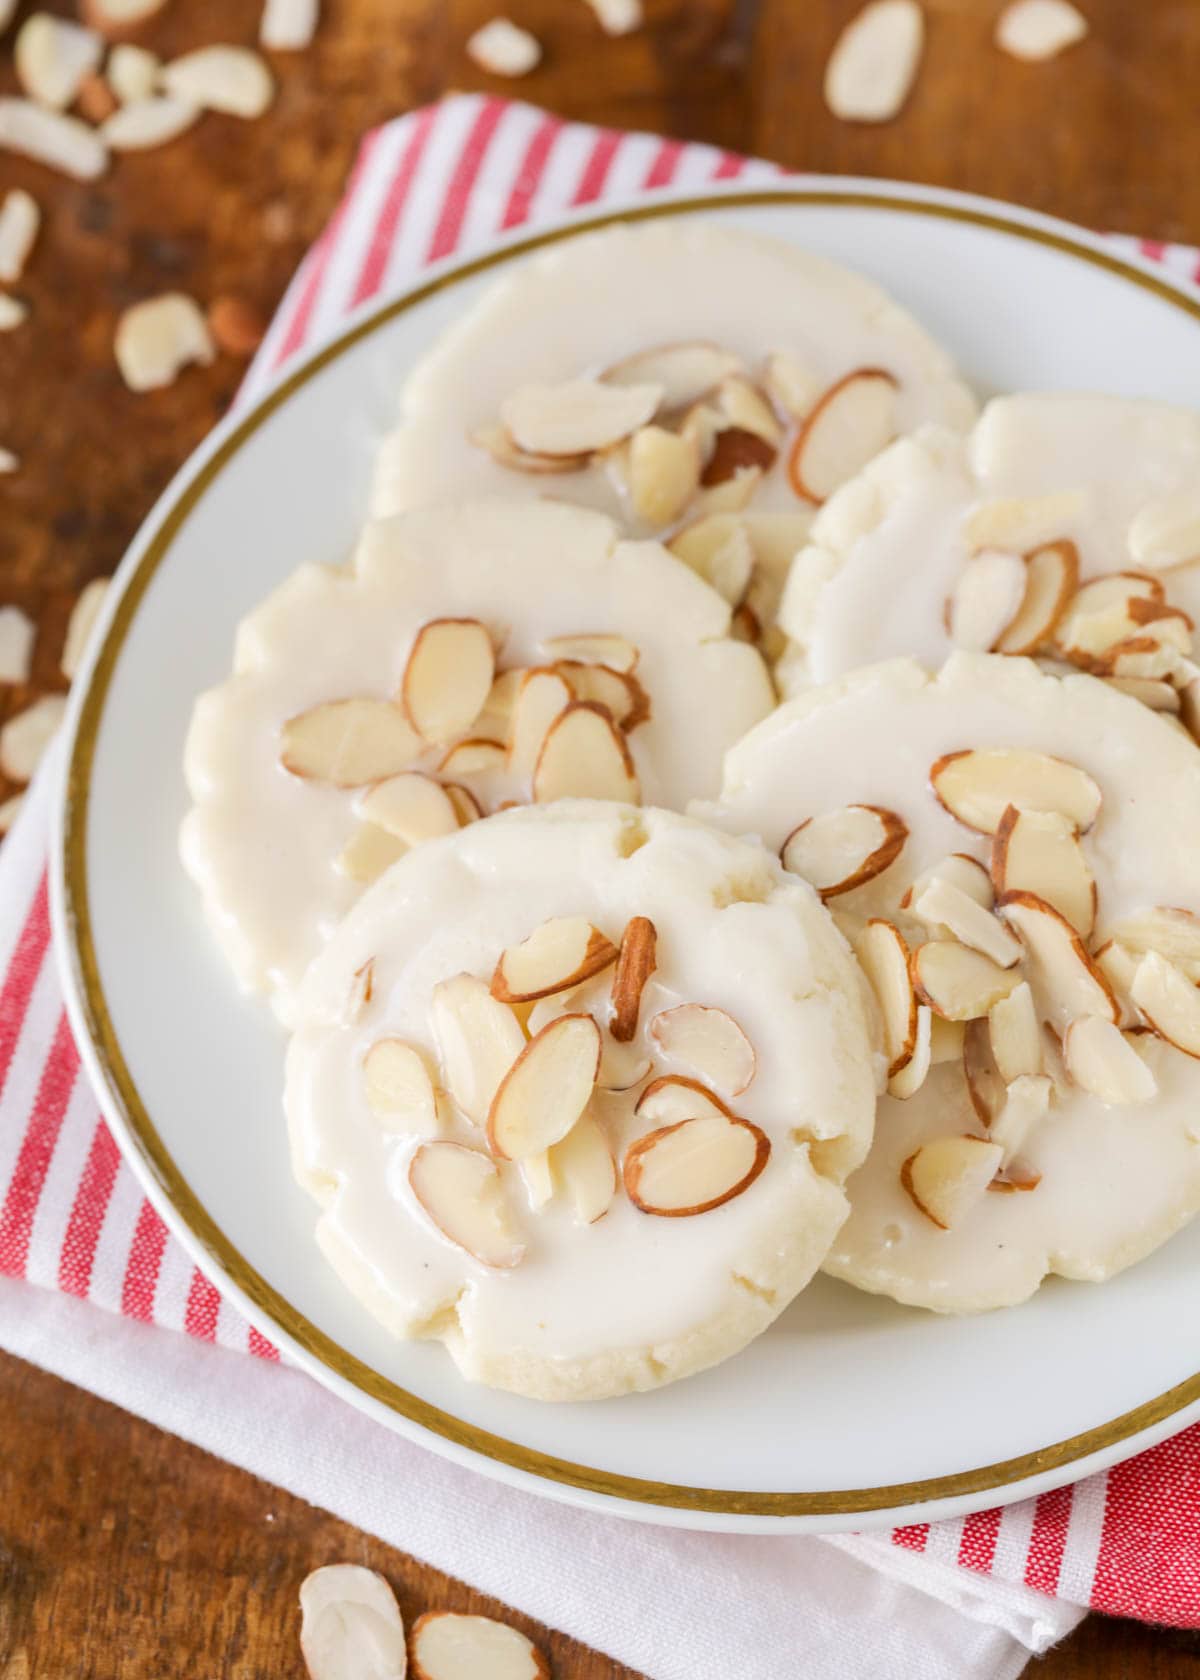 Almond cookie recipe topped with sliced almonds on a white plate